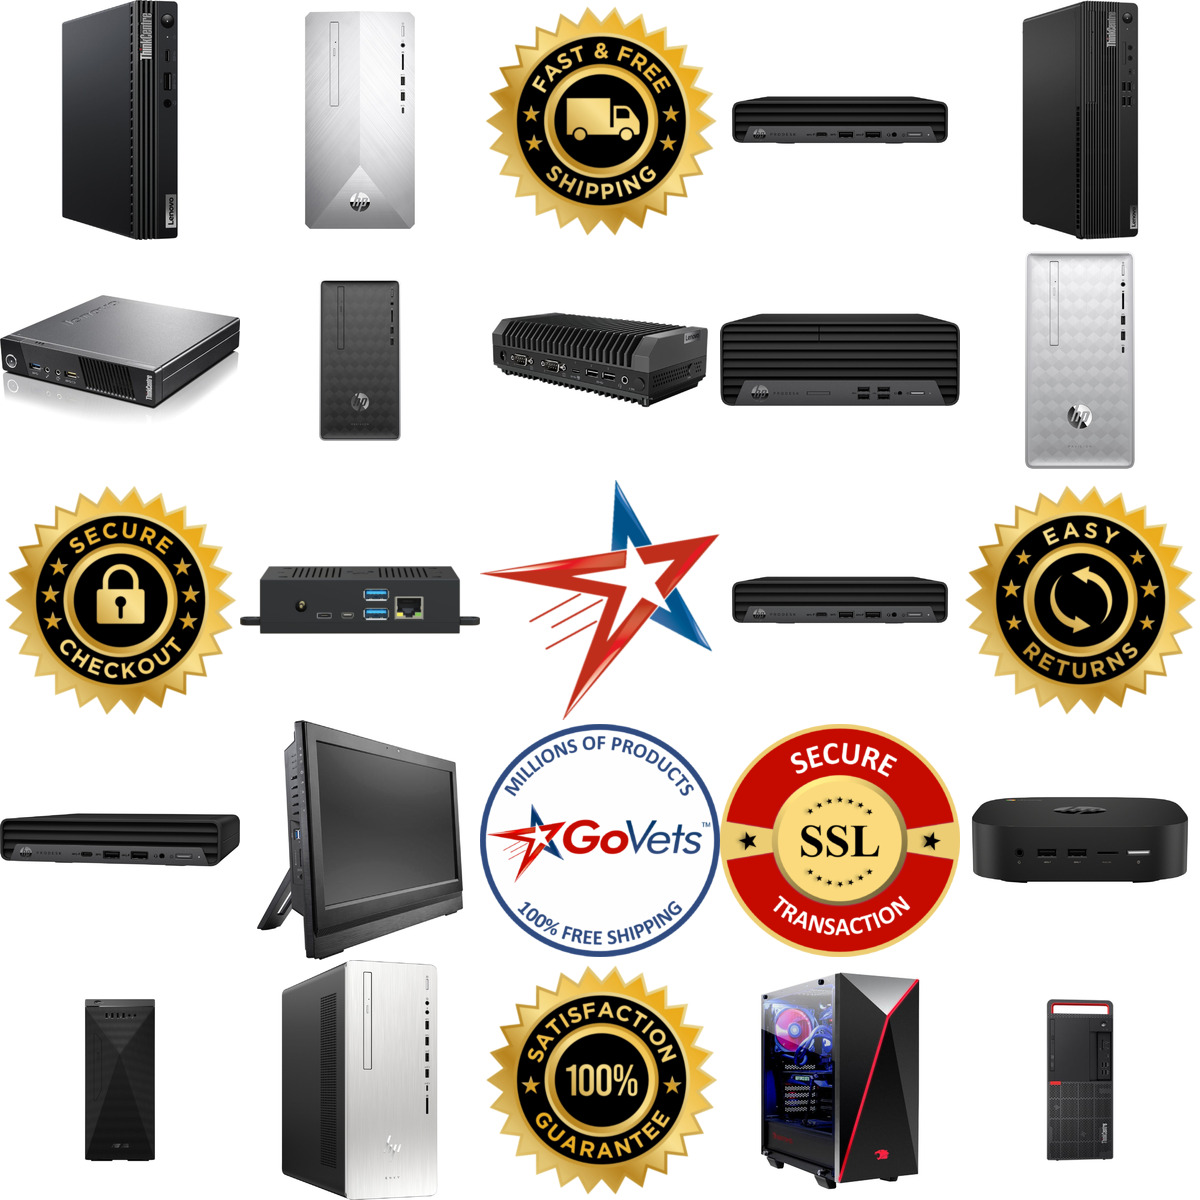 A selection of Computer Towers products on GoVets